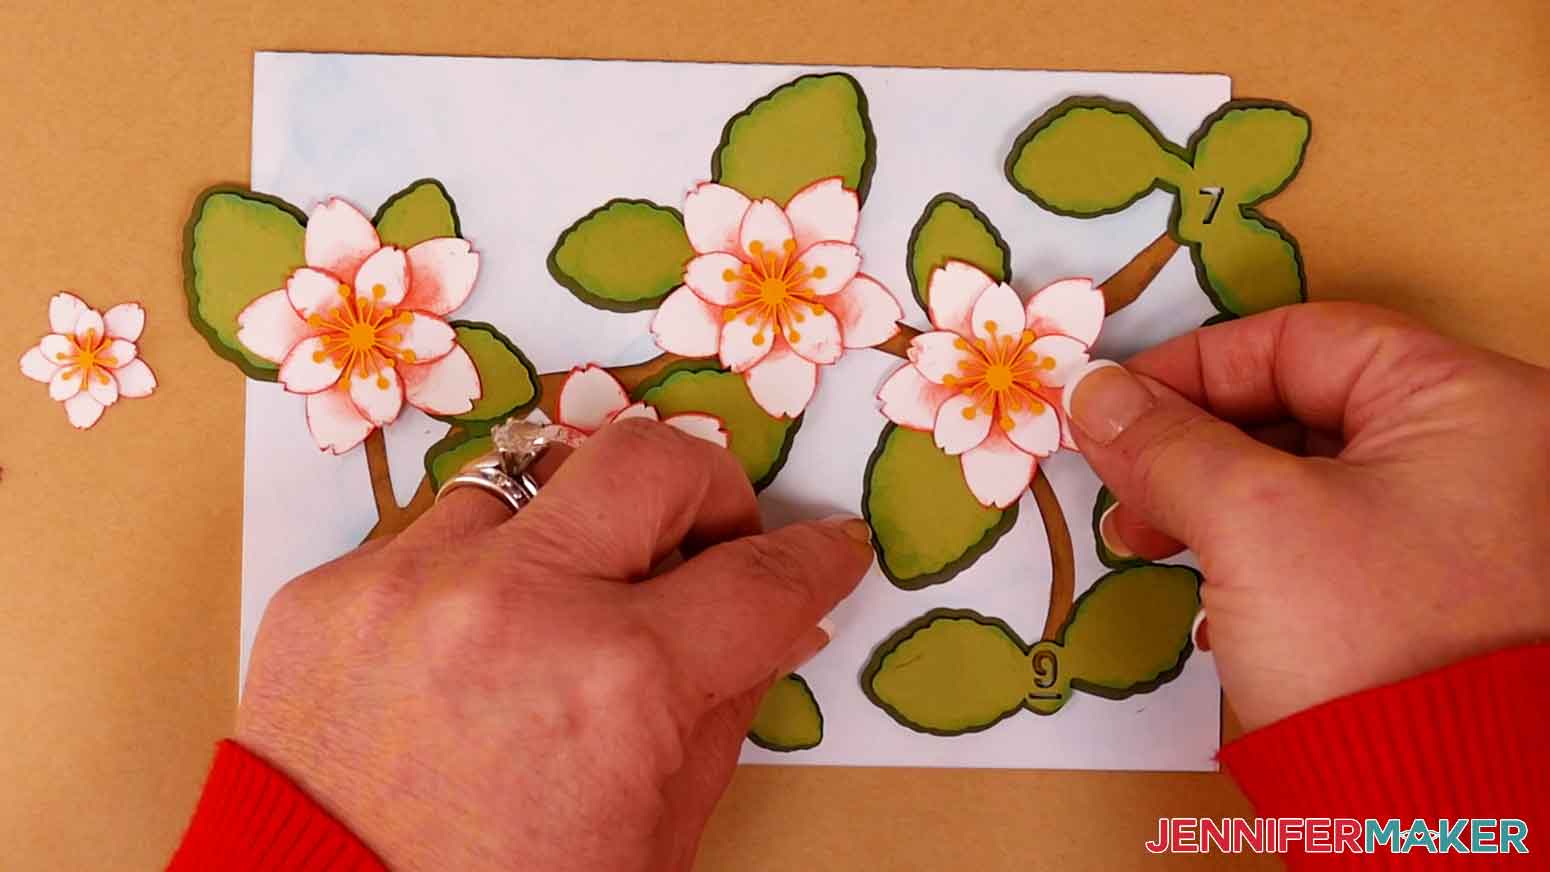 Apply craft glue to the back side of the cherry blossom flowers and attach them to the leaves.